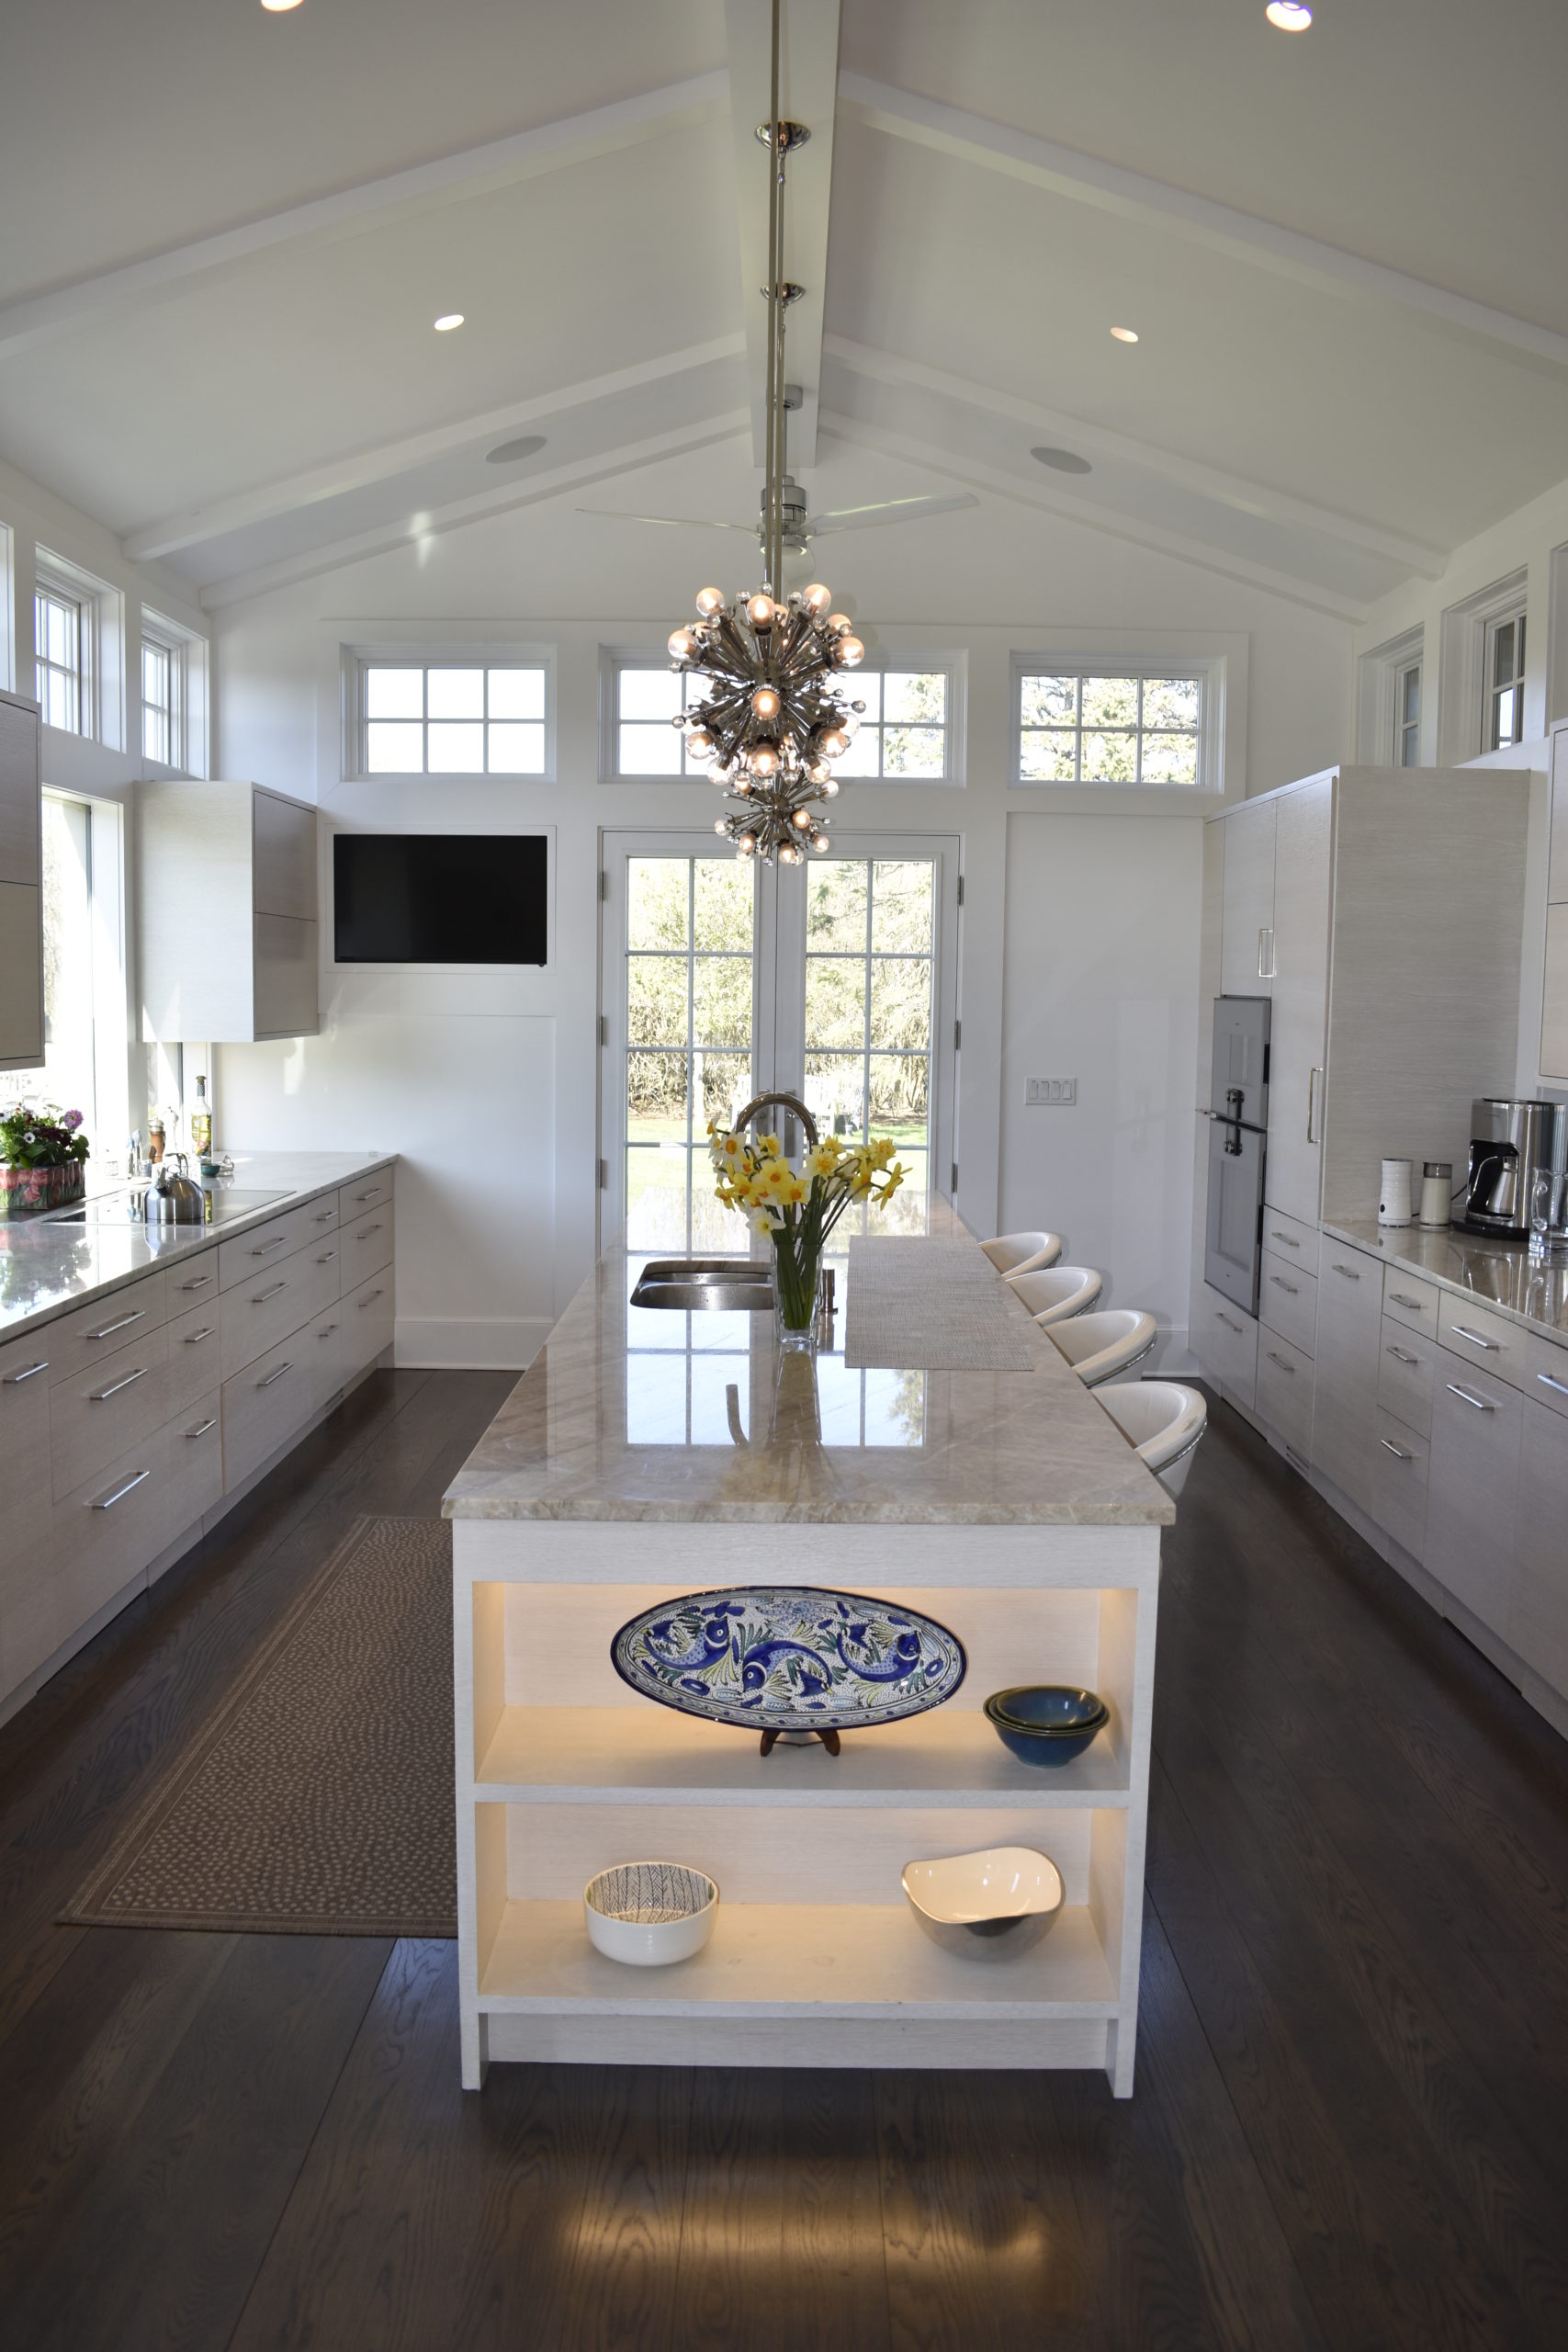 The kitchen in Evan Mason's Sagaponack home, with LED lighting, a wall of glass to the left, and energy and water efficient appliances.